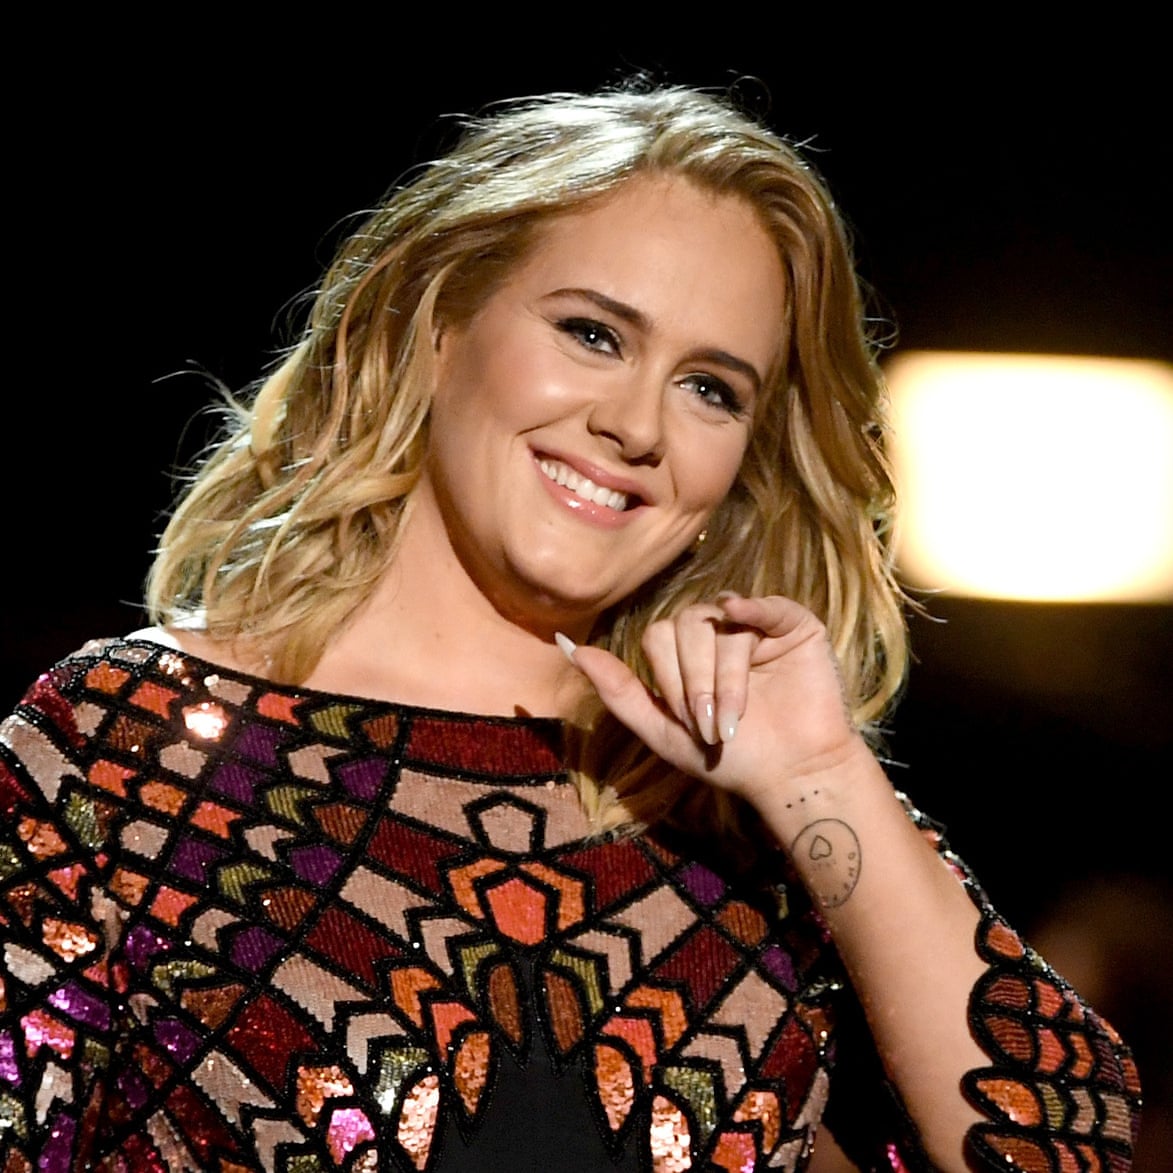 Adele's Manager Confirms Singer's New Album is NOT Coming In September